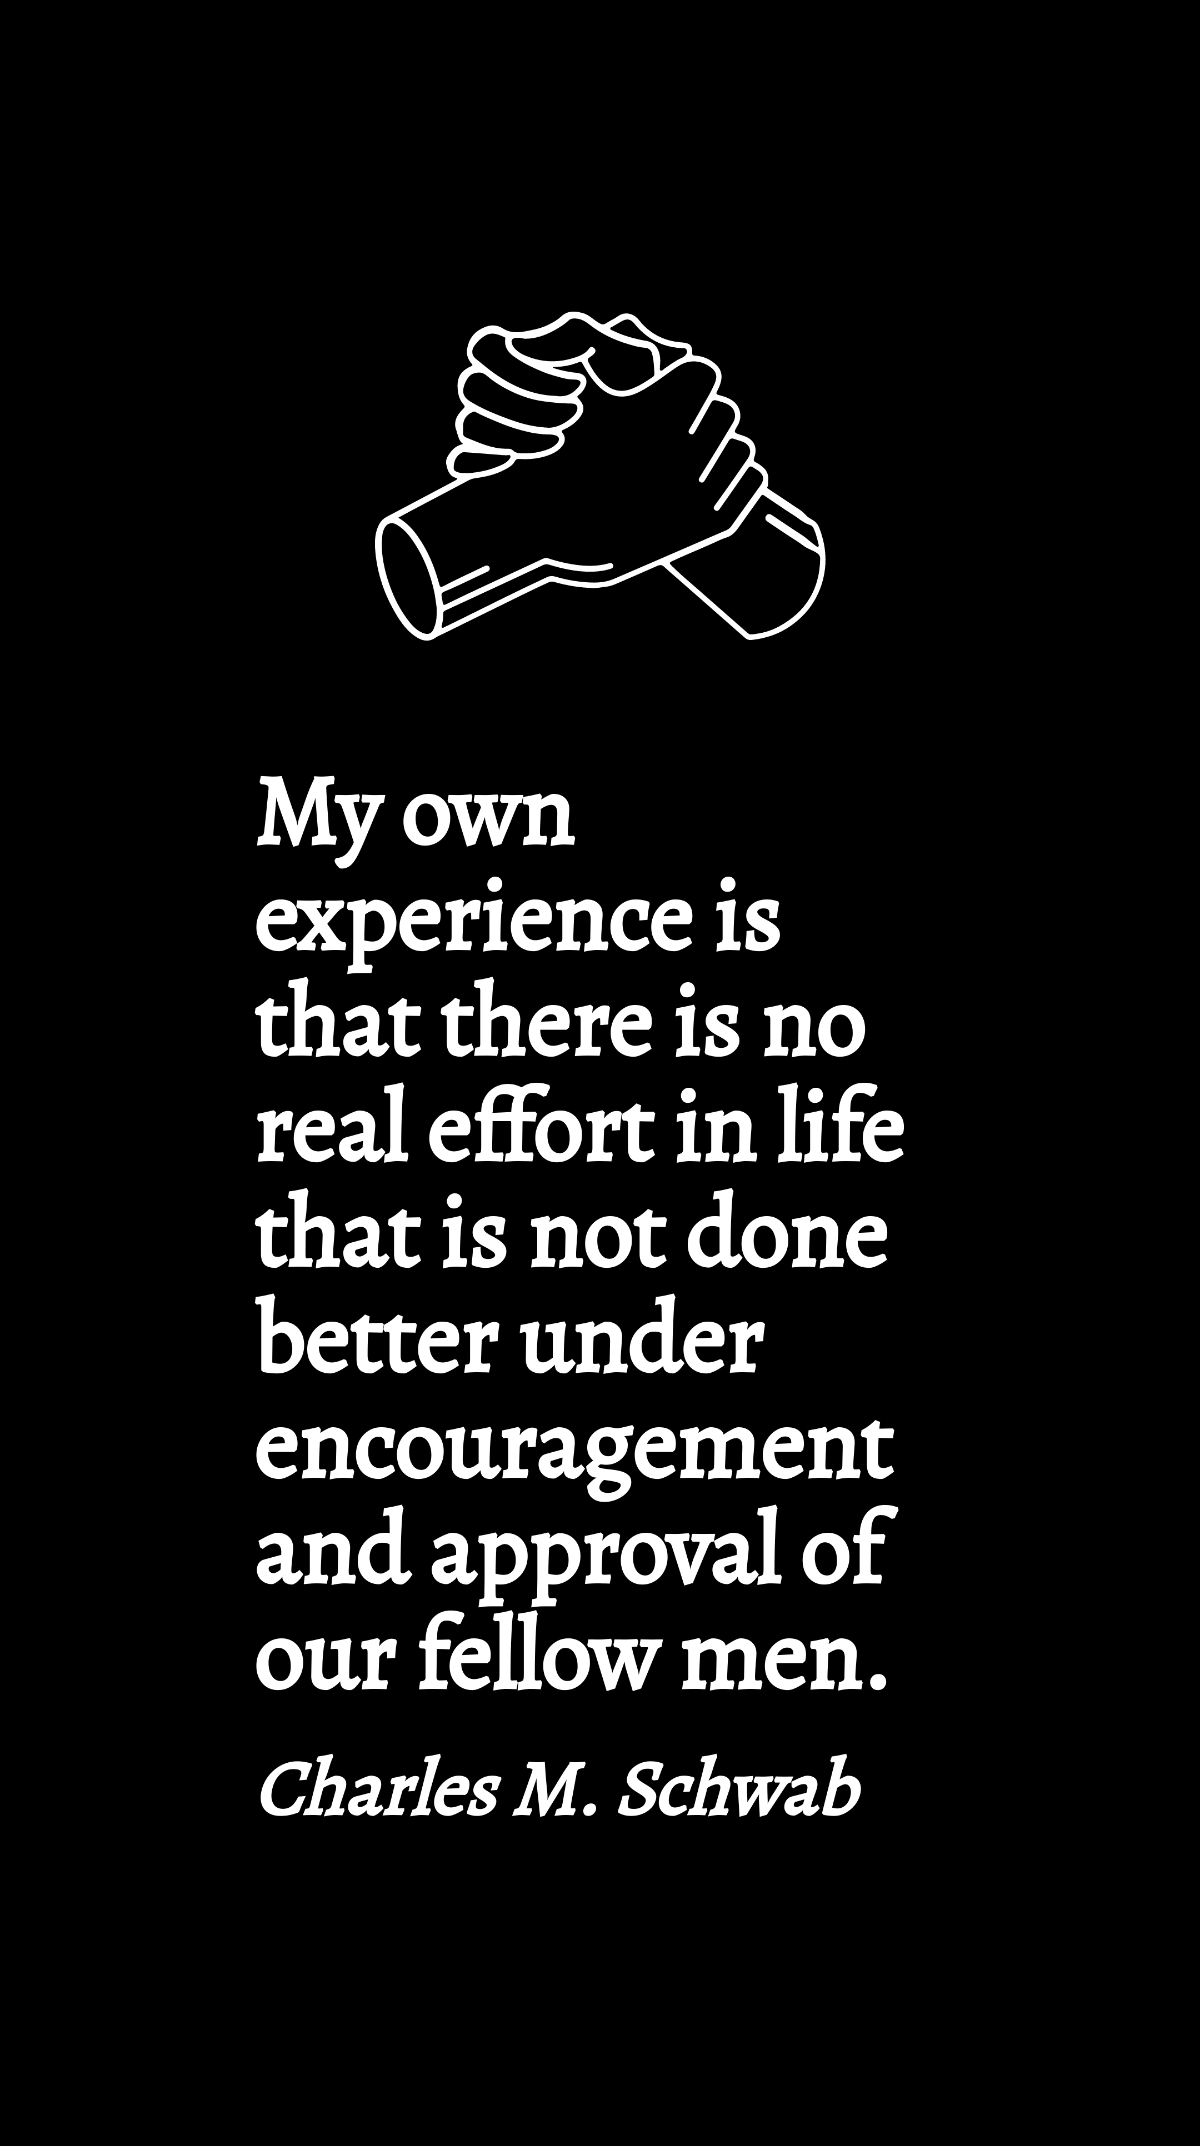 Charles M. Schwab - My own experience is that there is no real effort in life that is not done better under encouragement and approval of our fellow men. Template